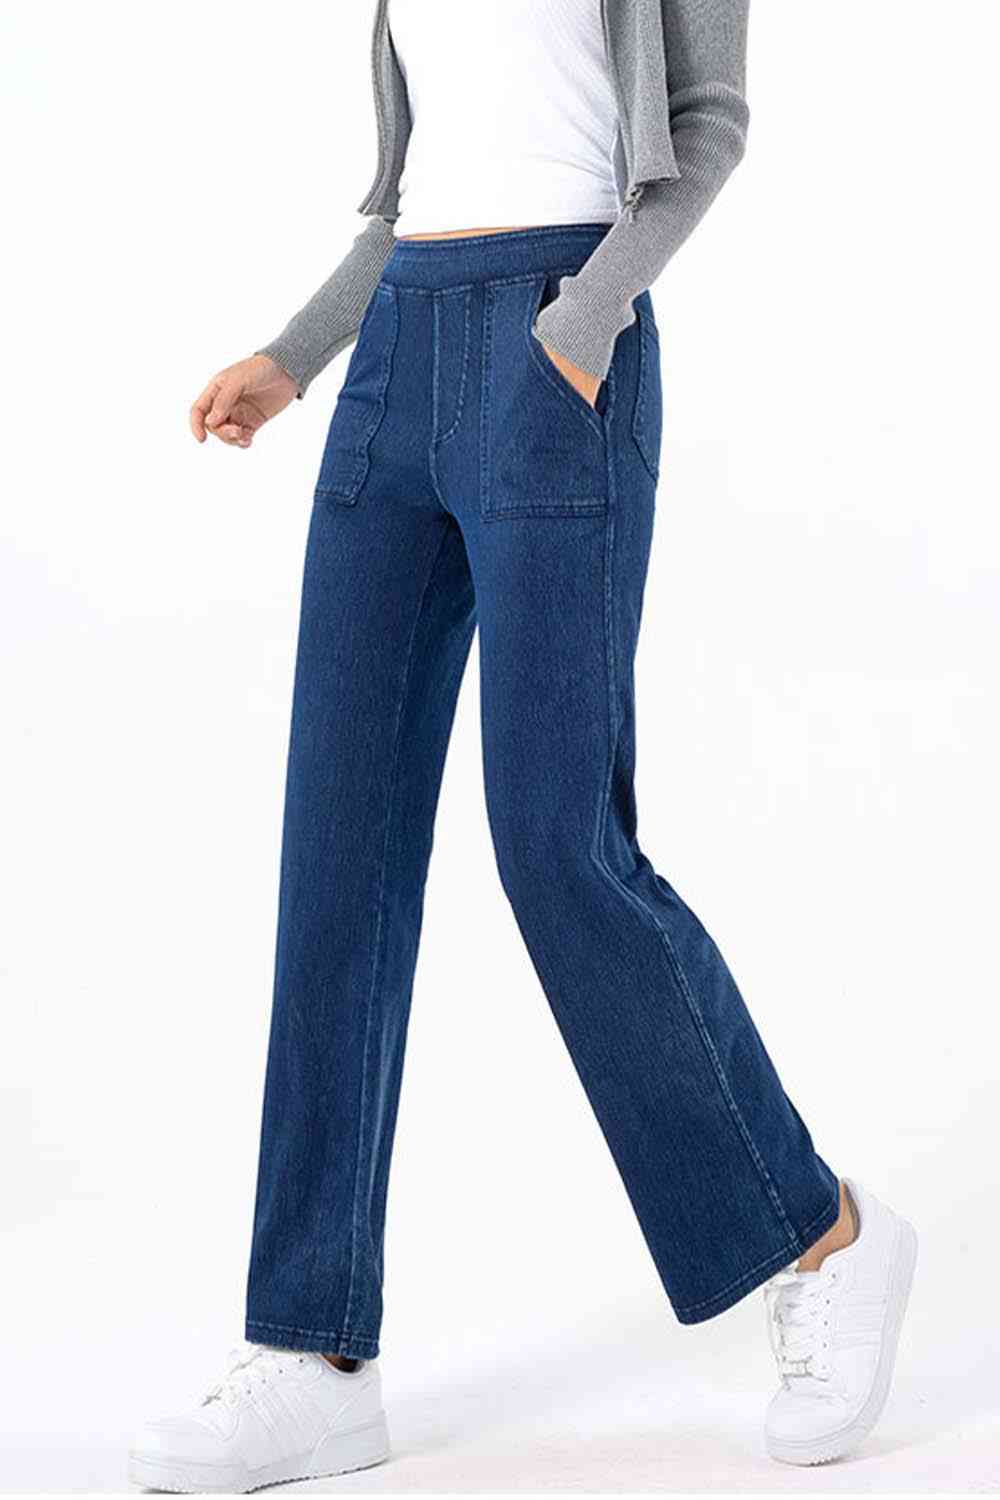 3 Colors - Pocketed Long Jeans